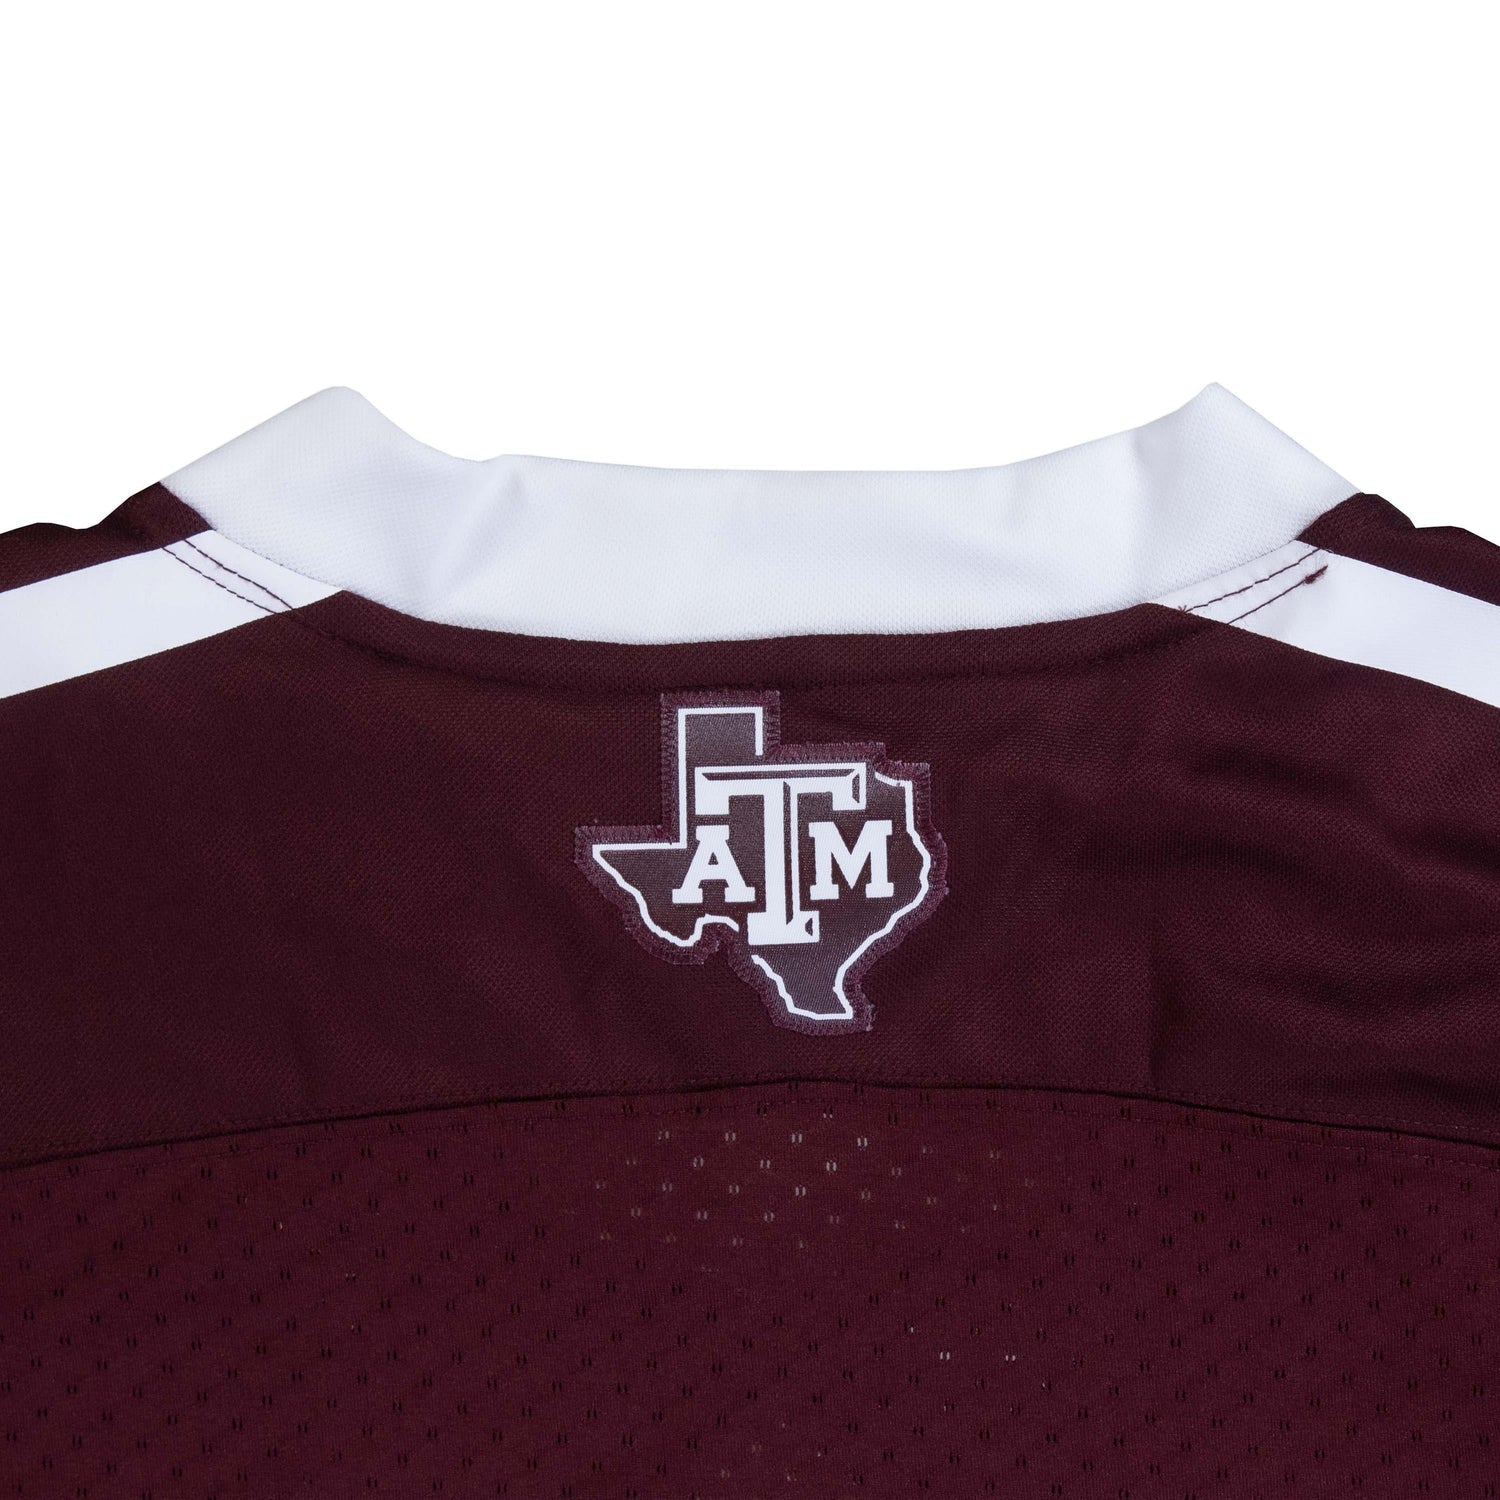 Johnny Manziel Signed Texas A&M Aggies Stat Jersey Ins Johnny Fu